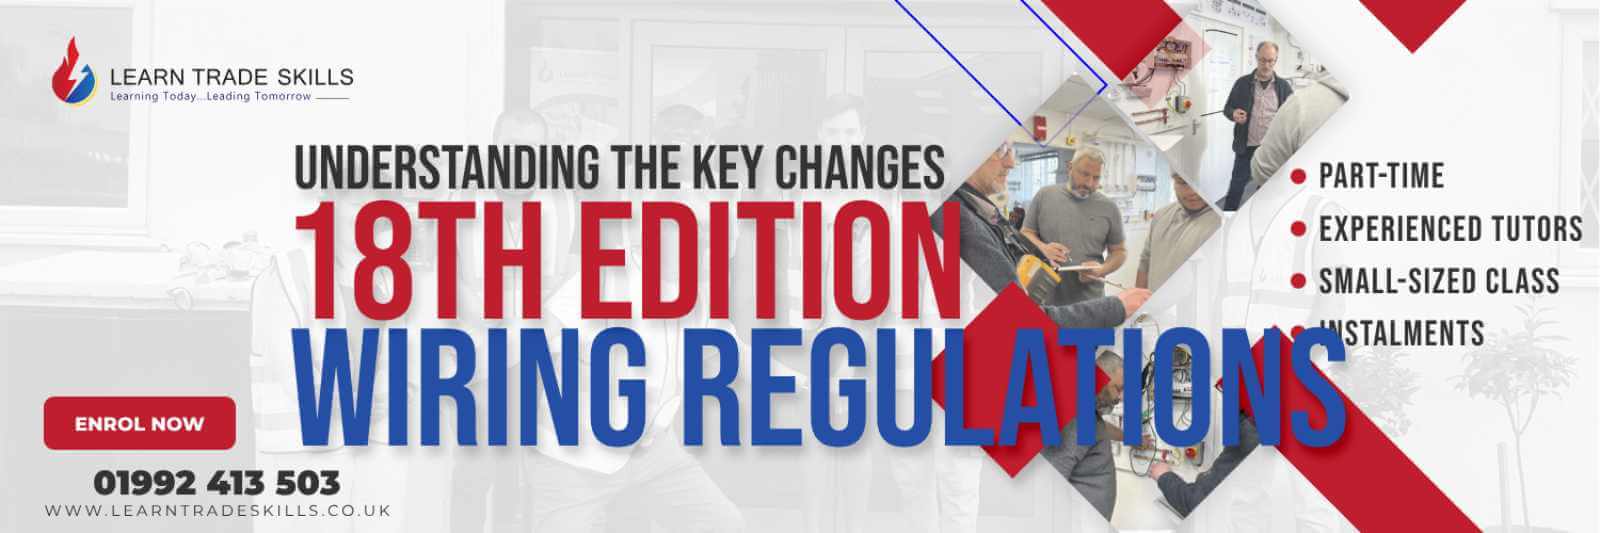 Understanding the Key Changes in the 18th Edition Wiring Regulations